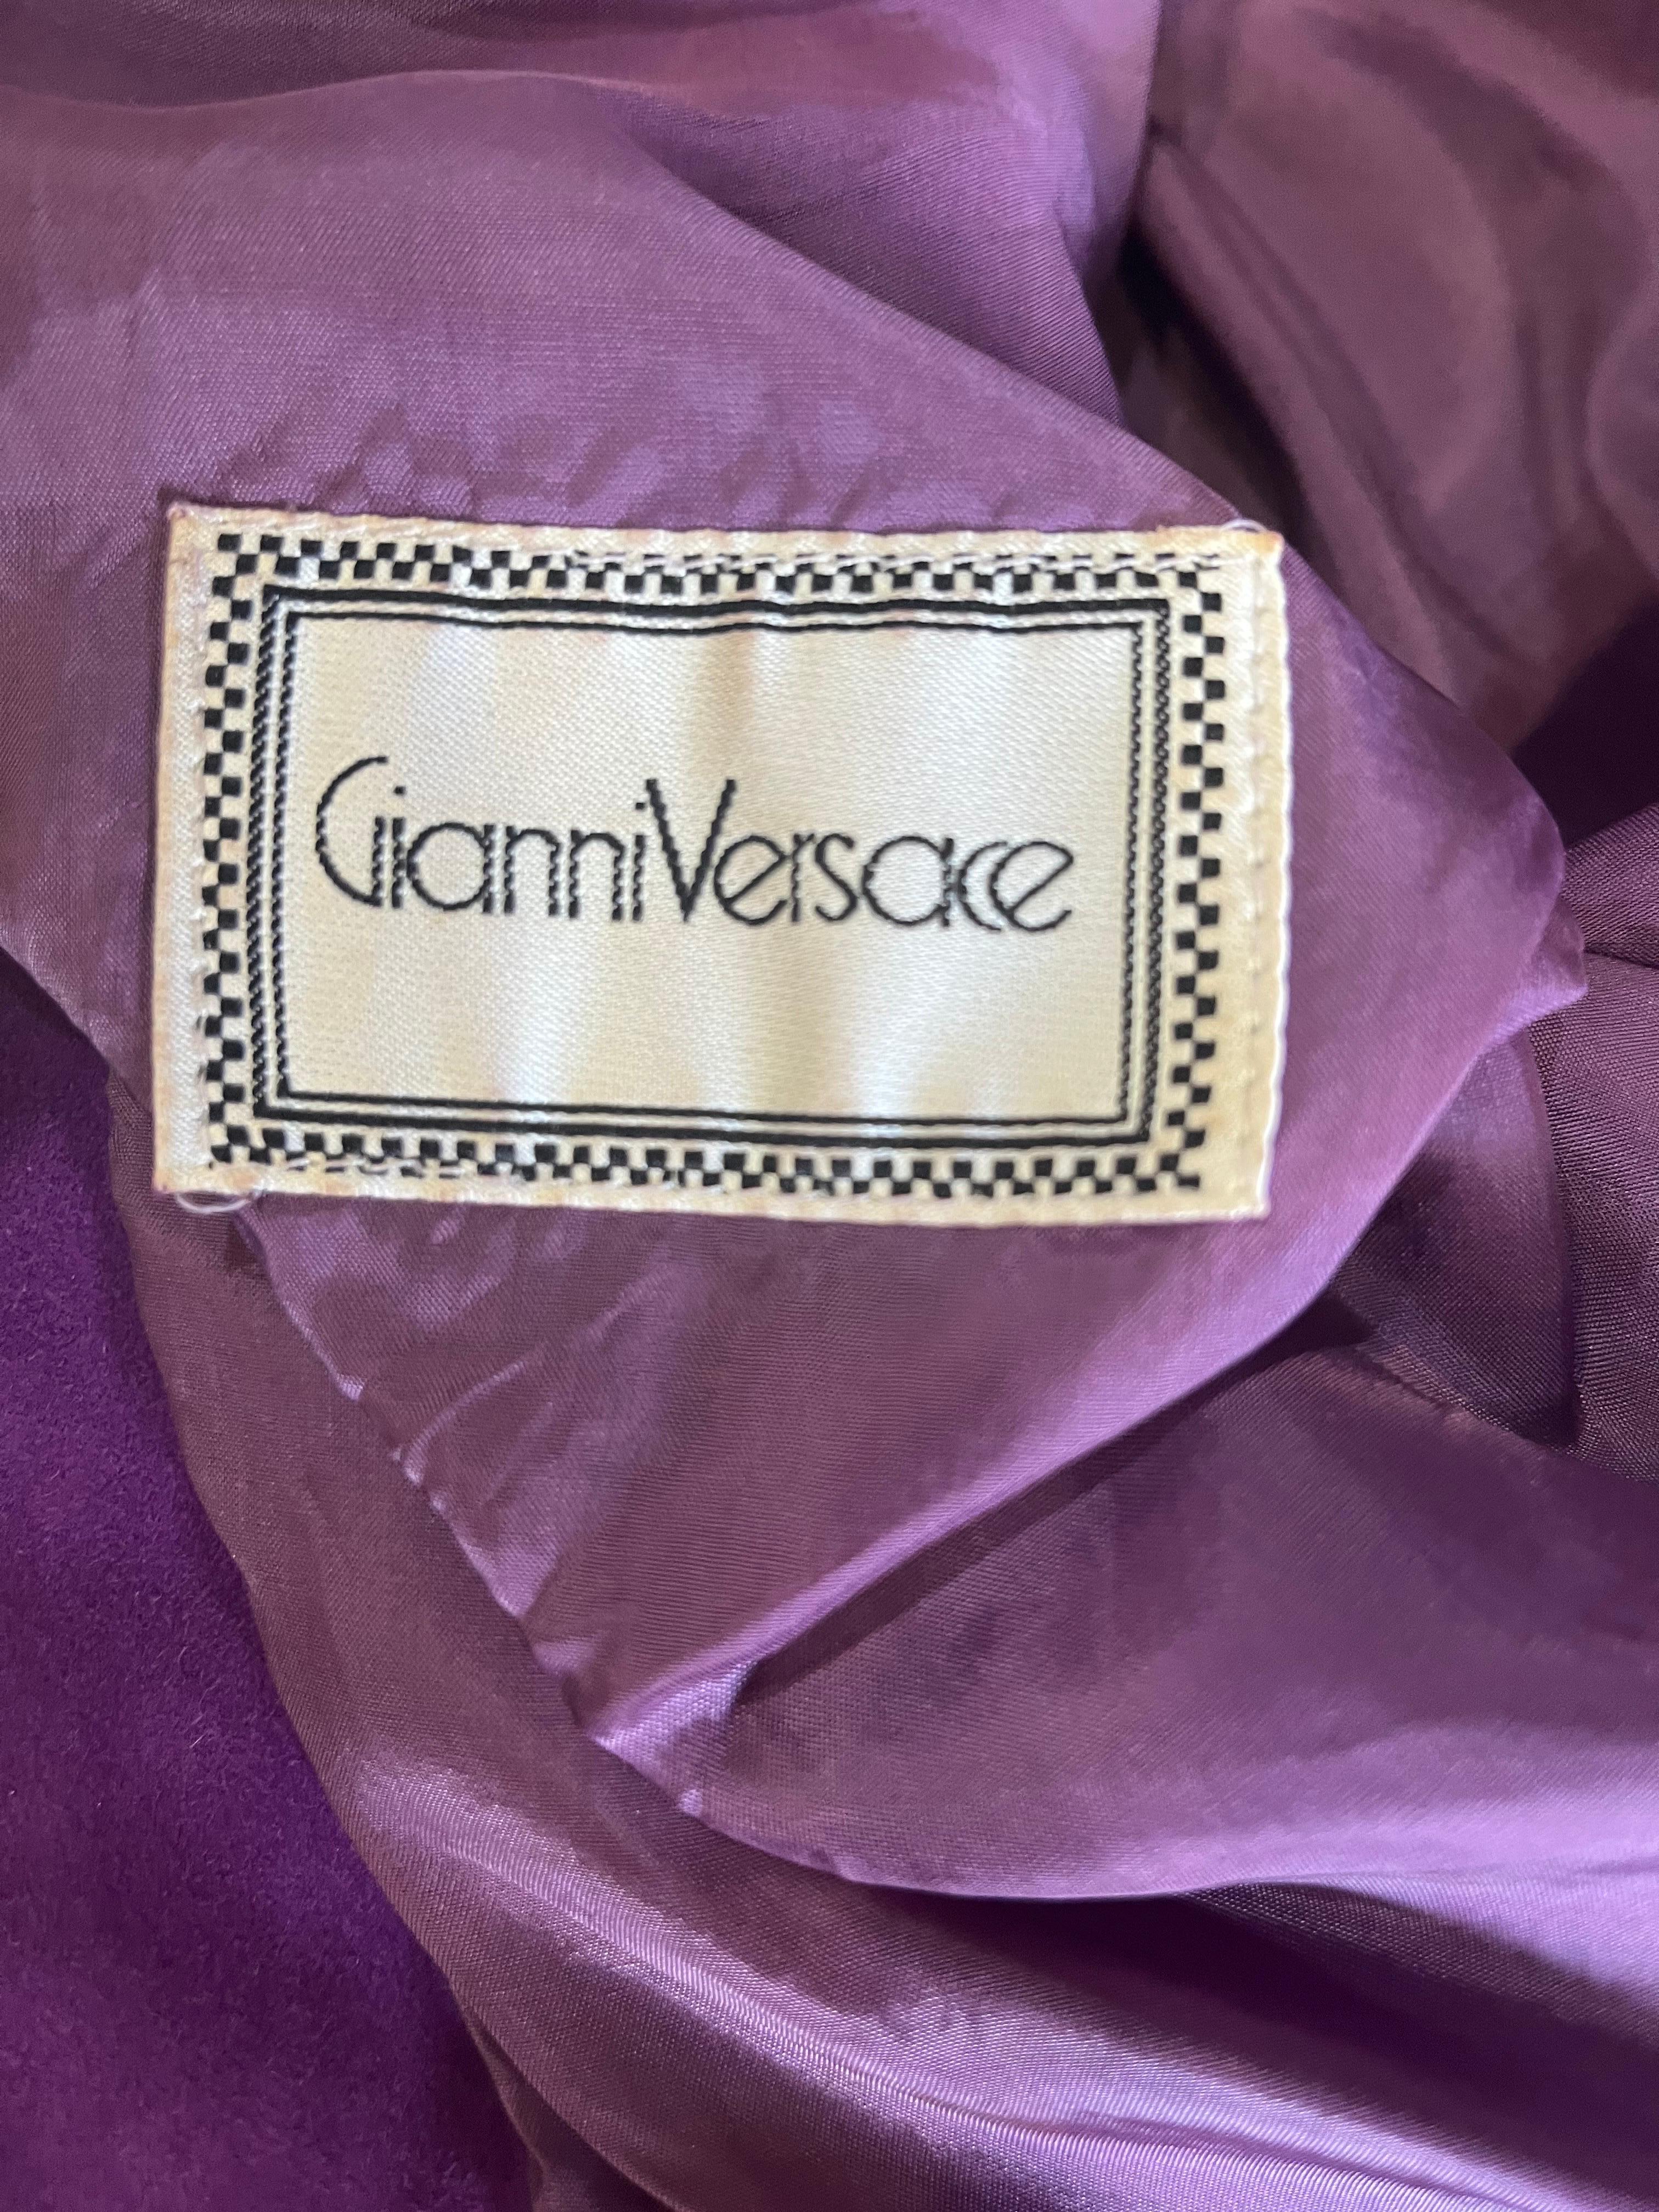 Gianni Versace vintage jacket from 80s For Sale 4